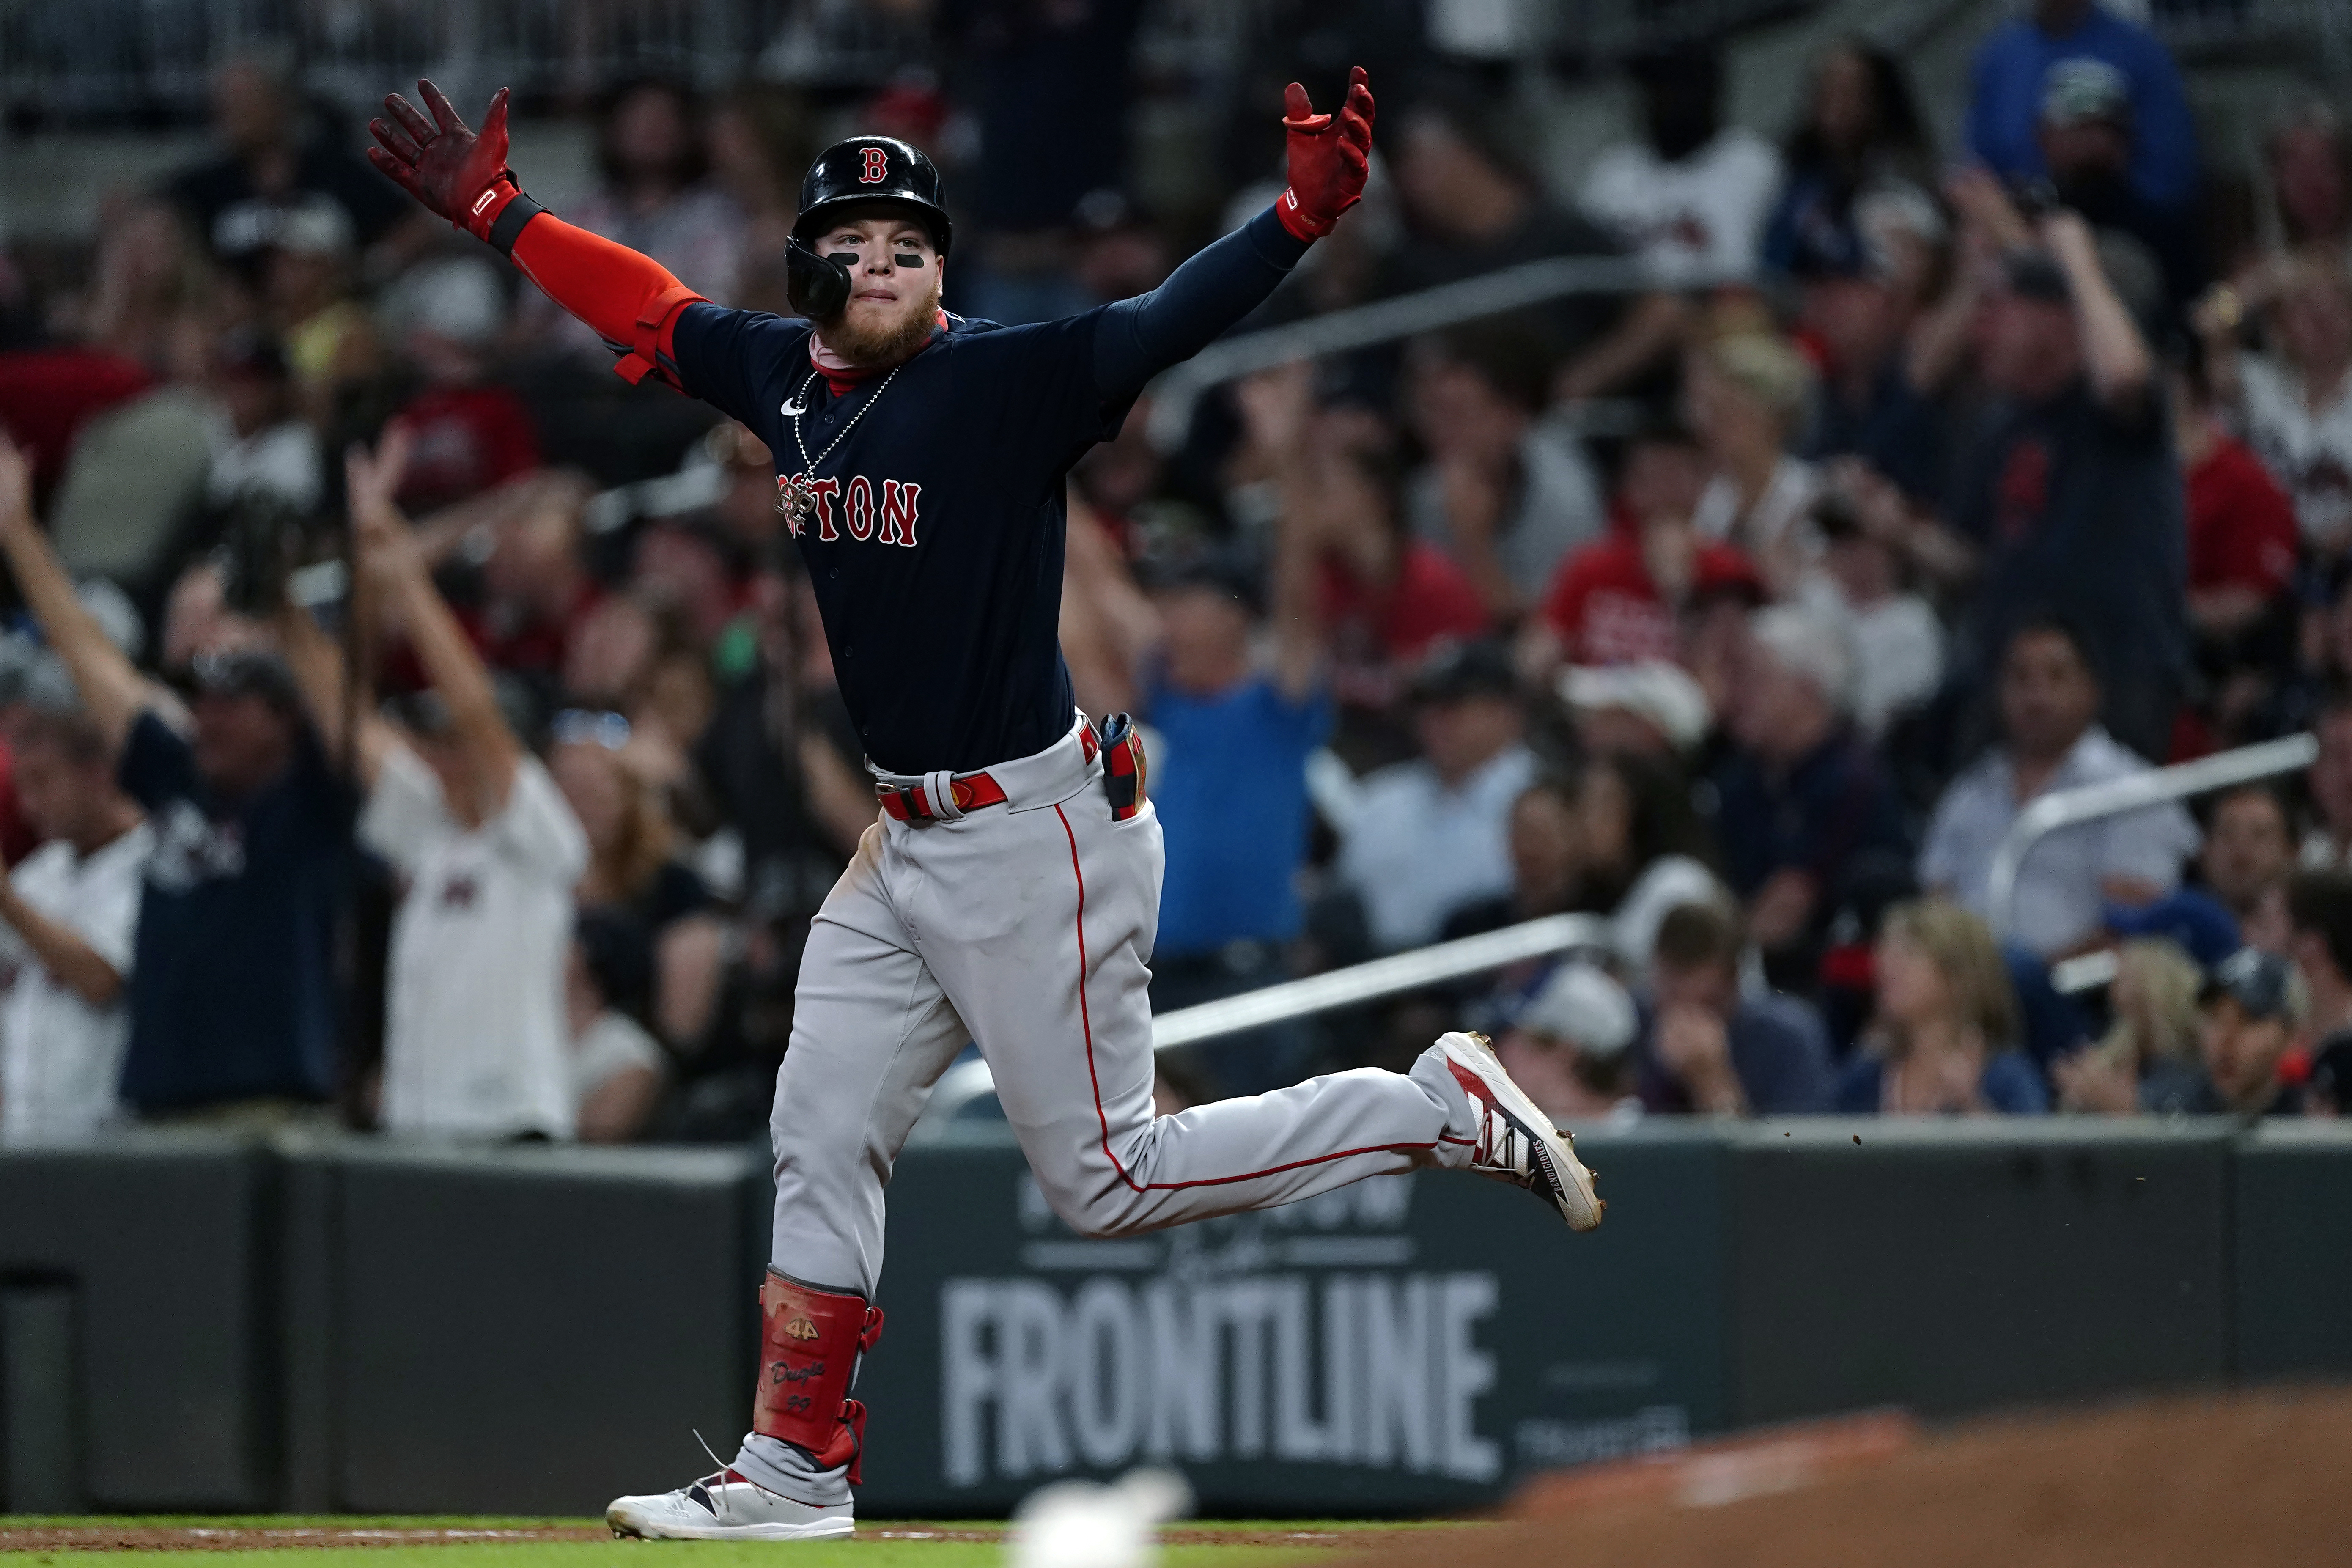 Why Red Sox fans should expect good things from Alex Verdugo in 2021